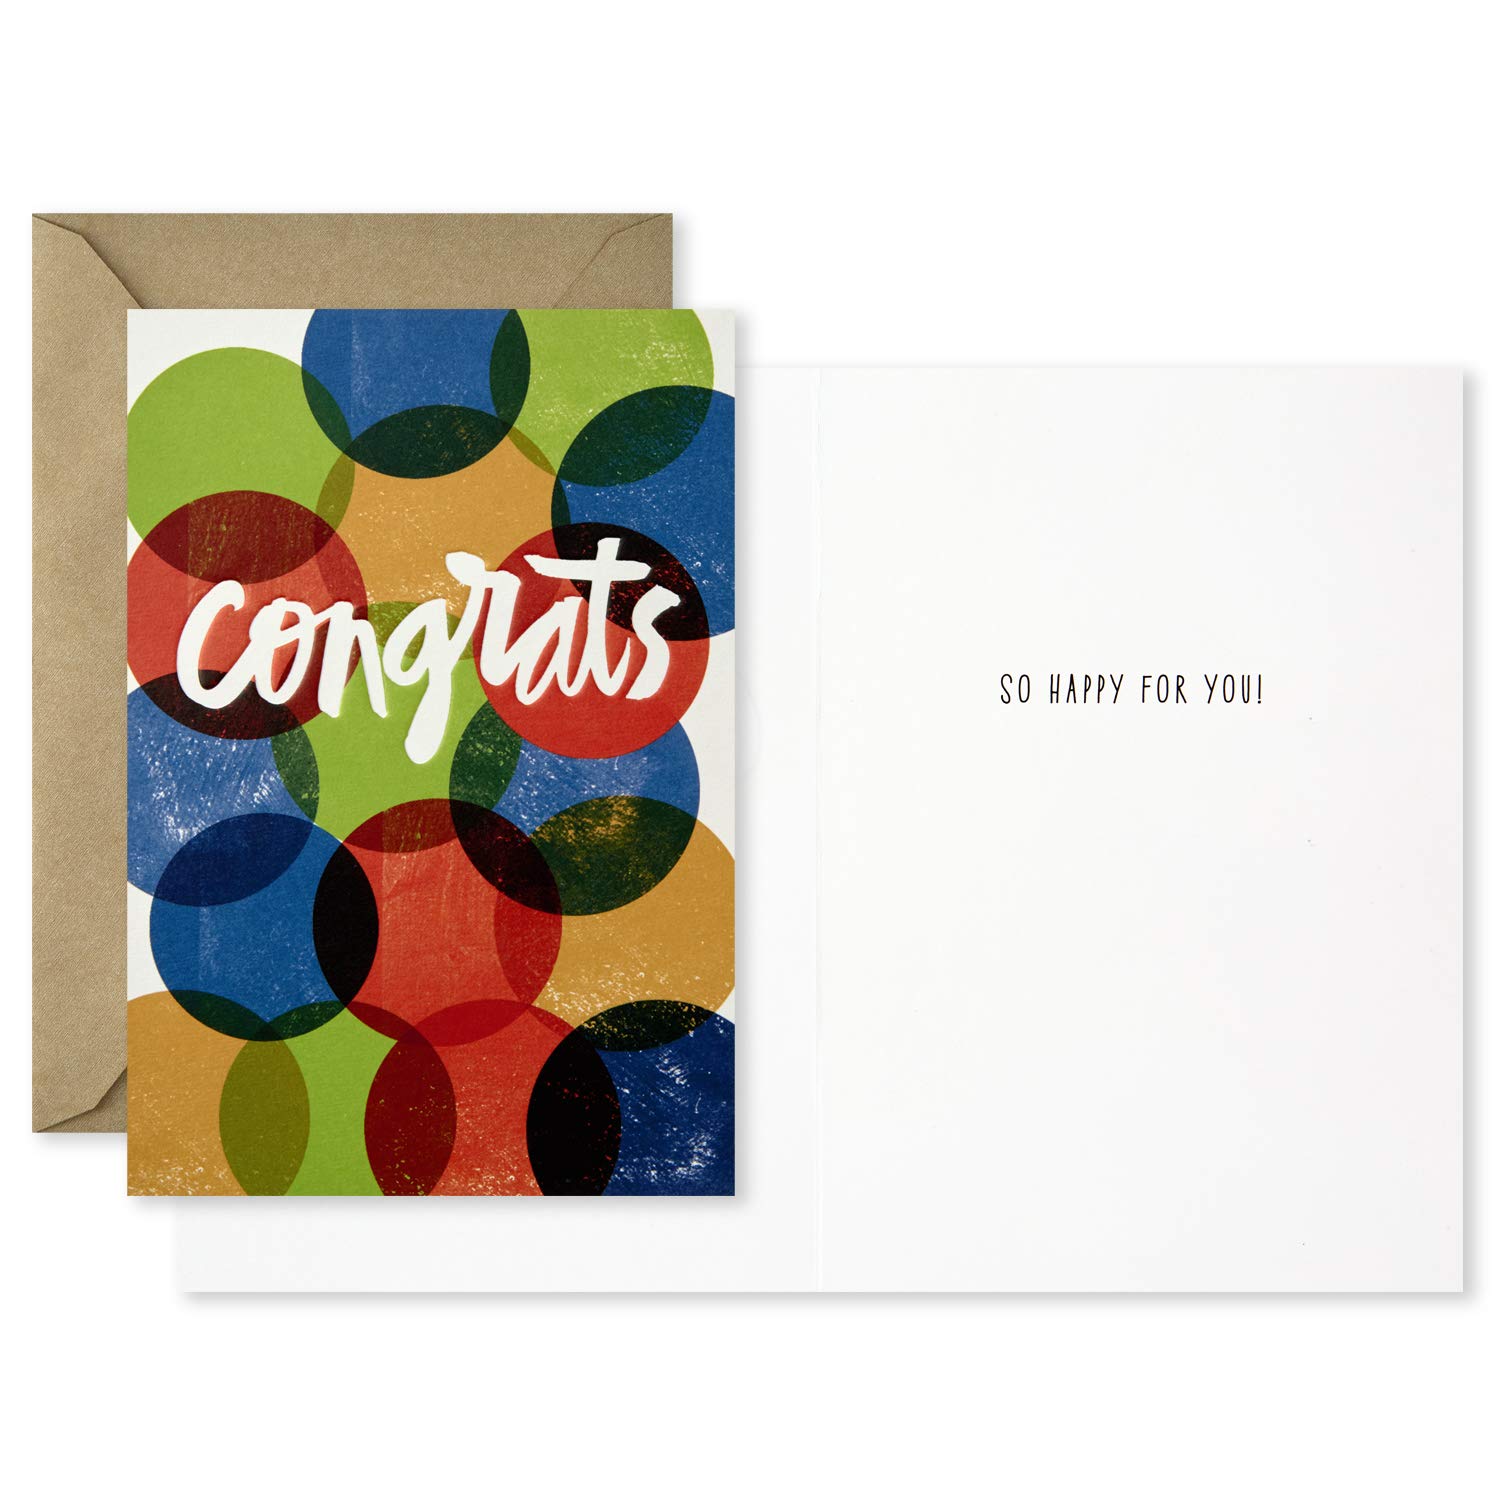 Hallmark Congratulations Cards Assortment (Boxed Set of 12 Cards with Envelopes)